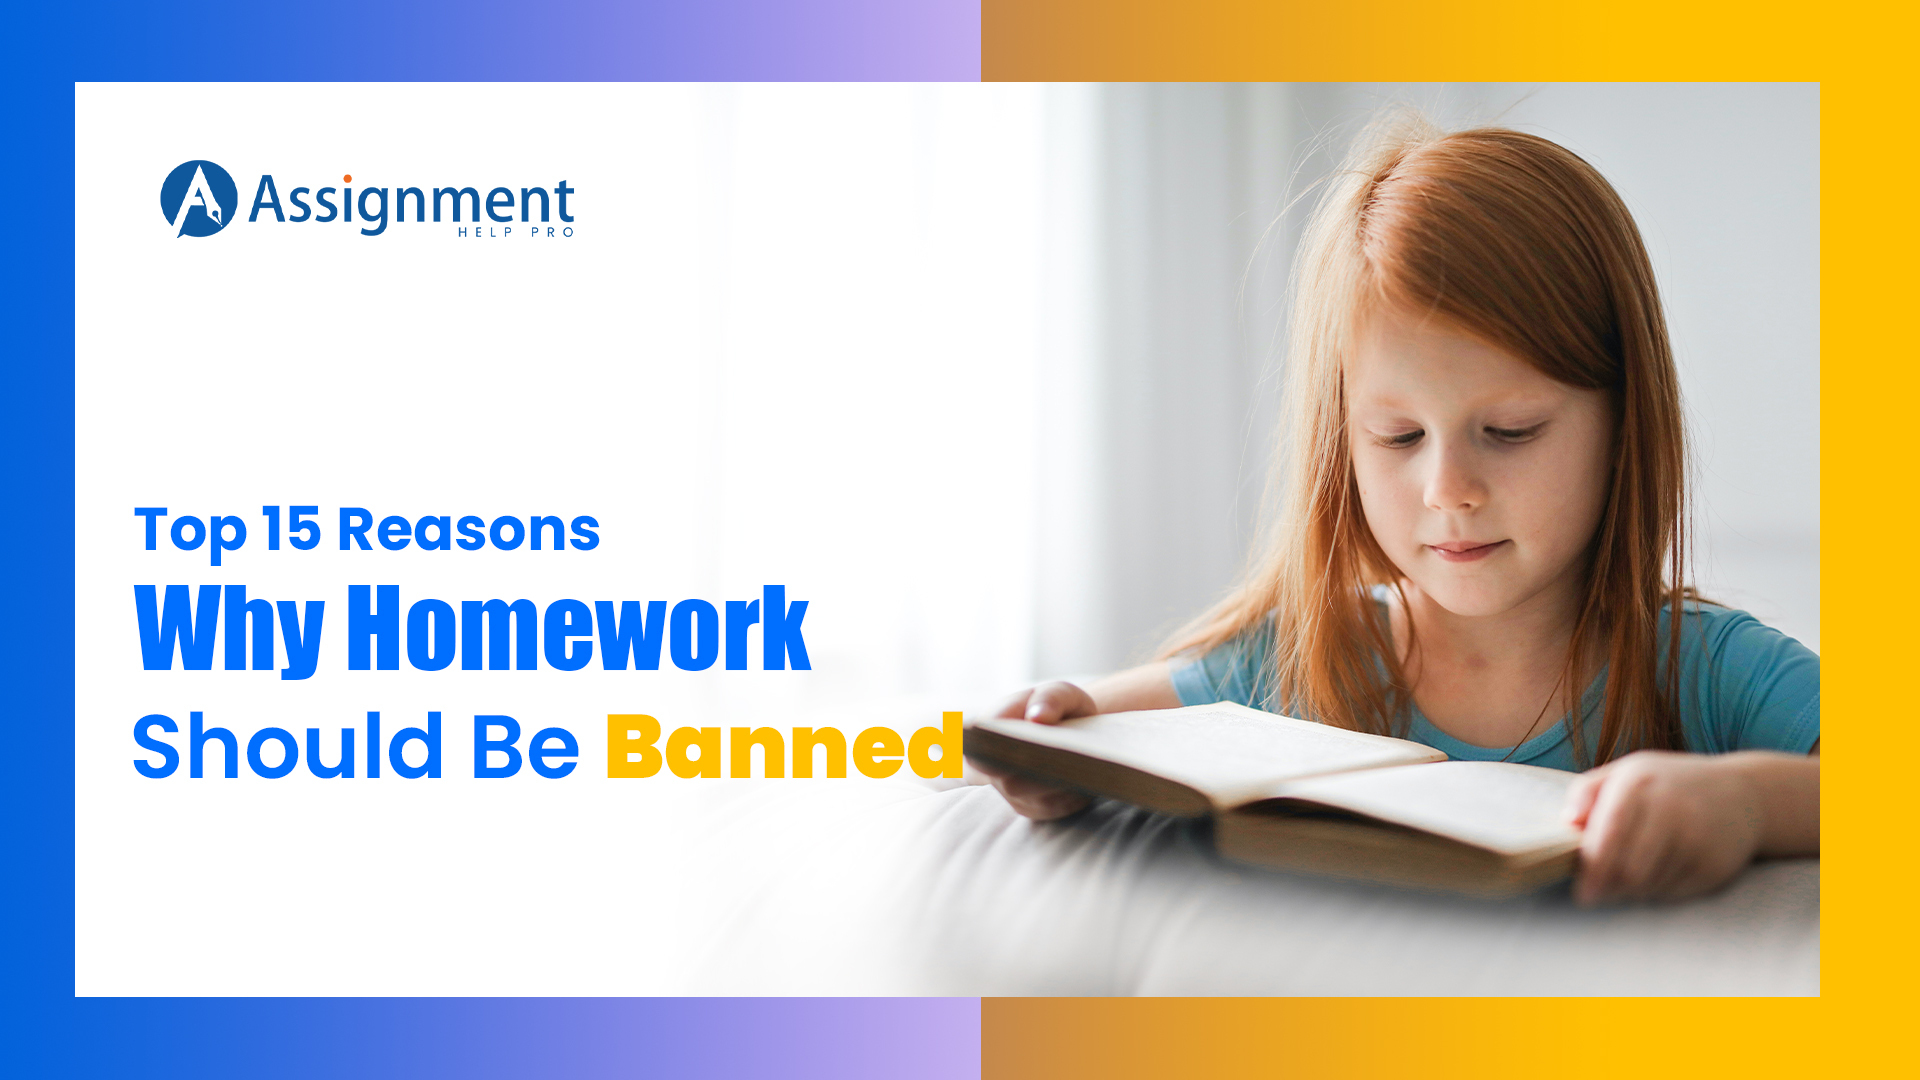 can homework get banned